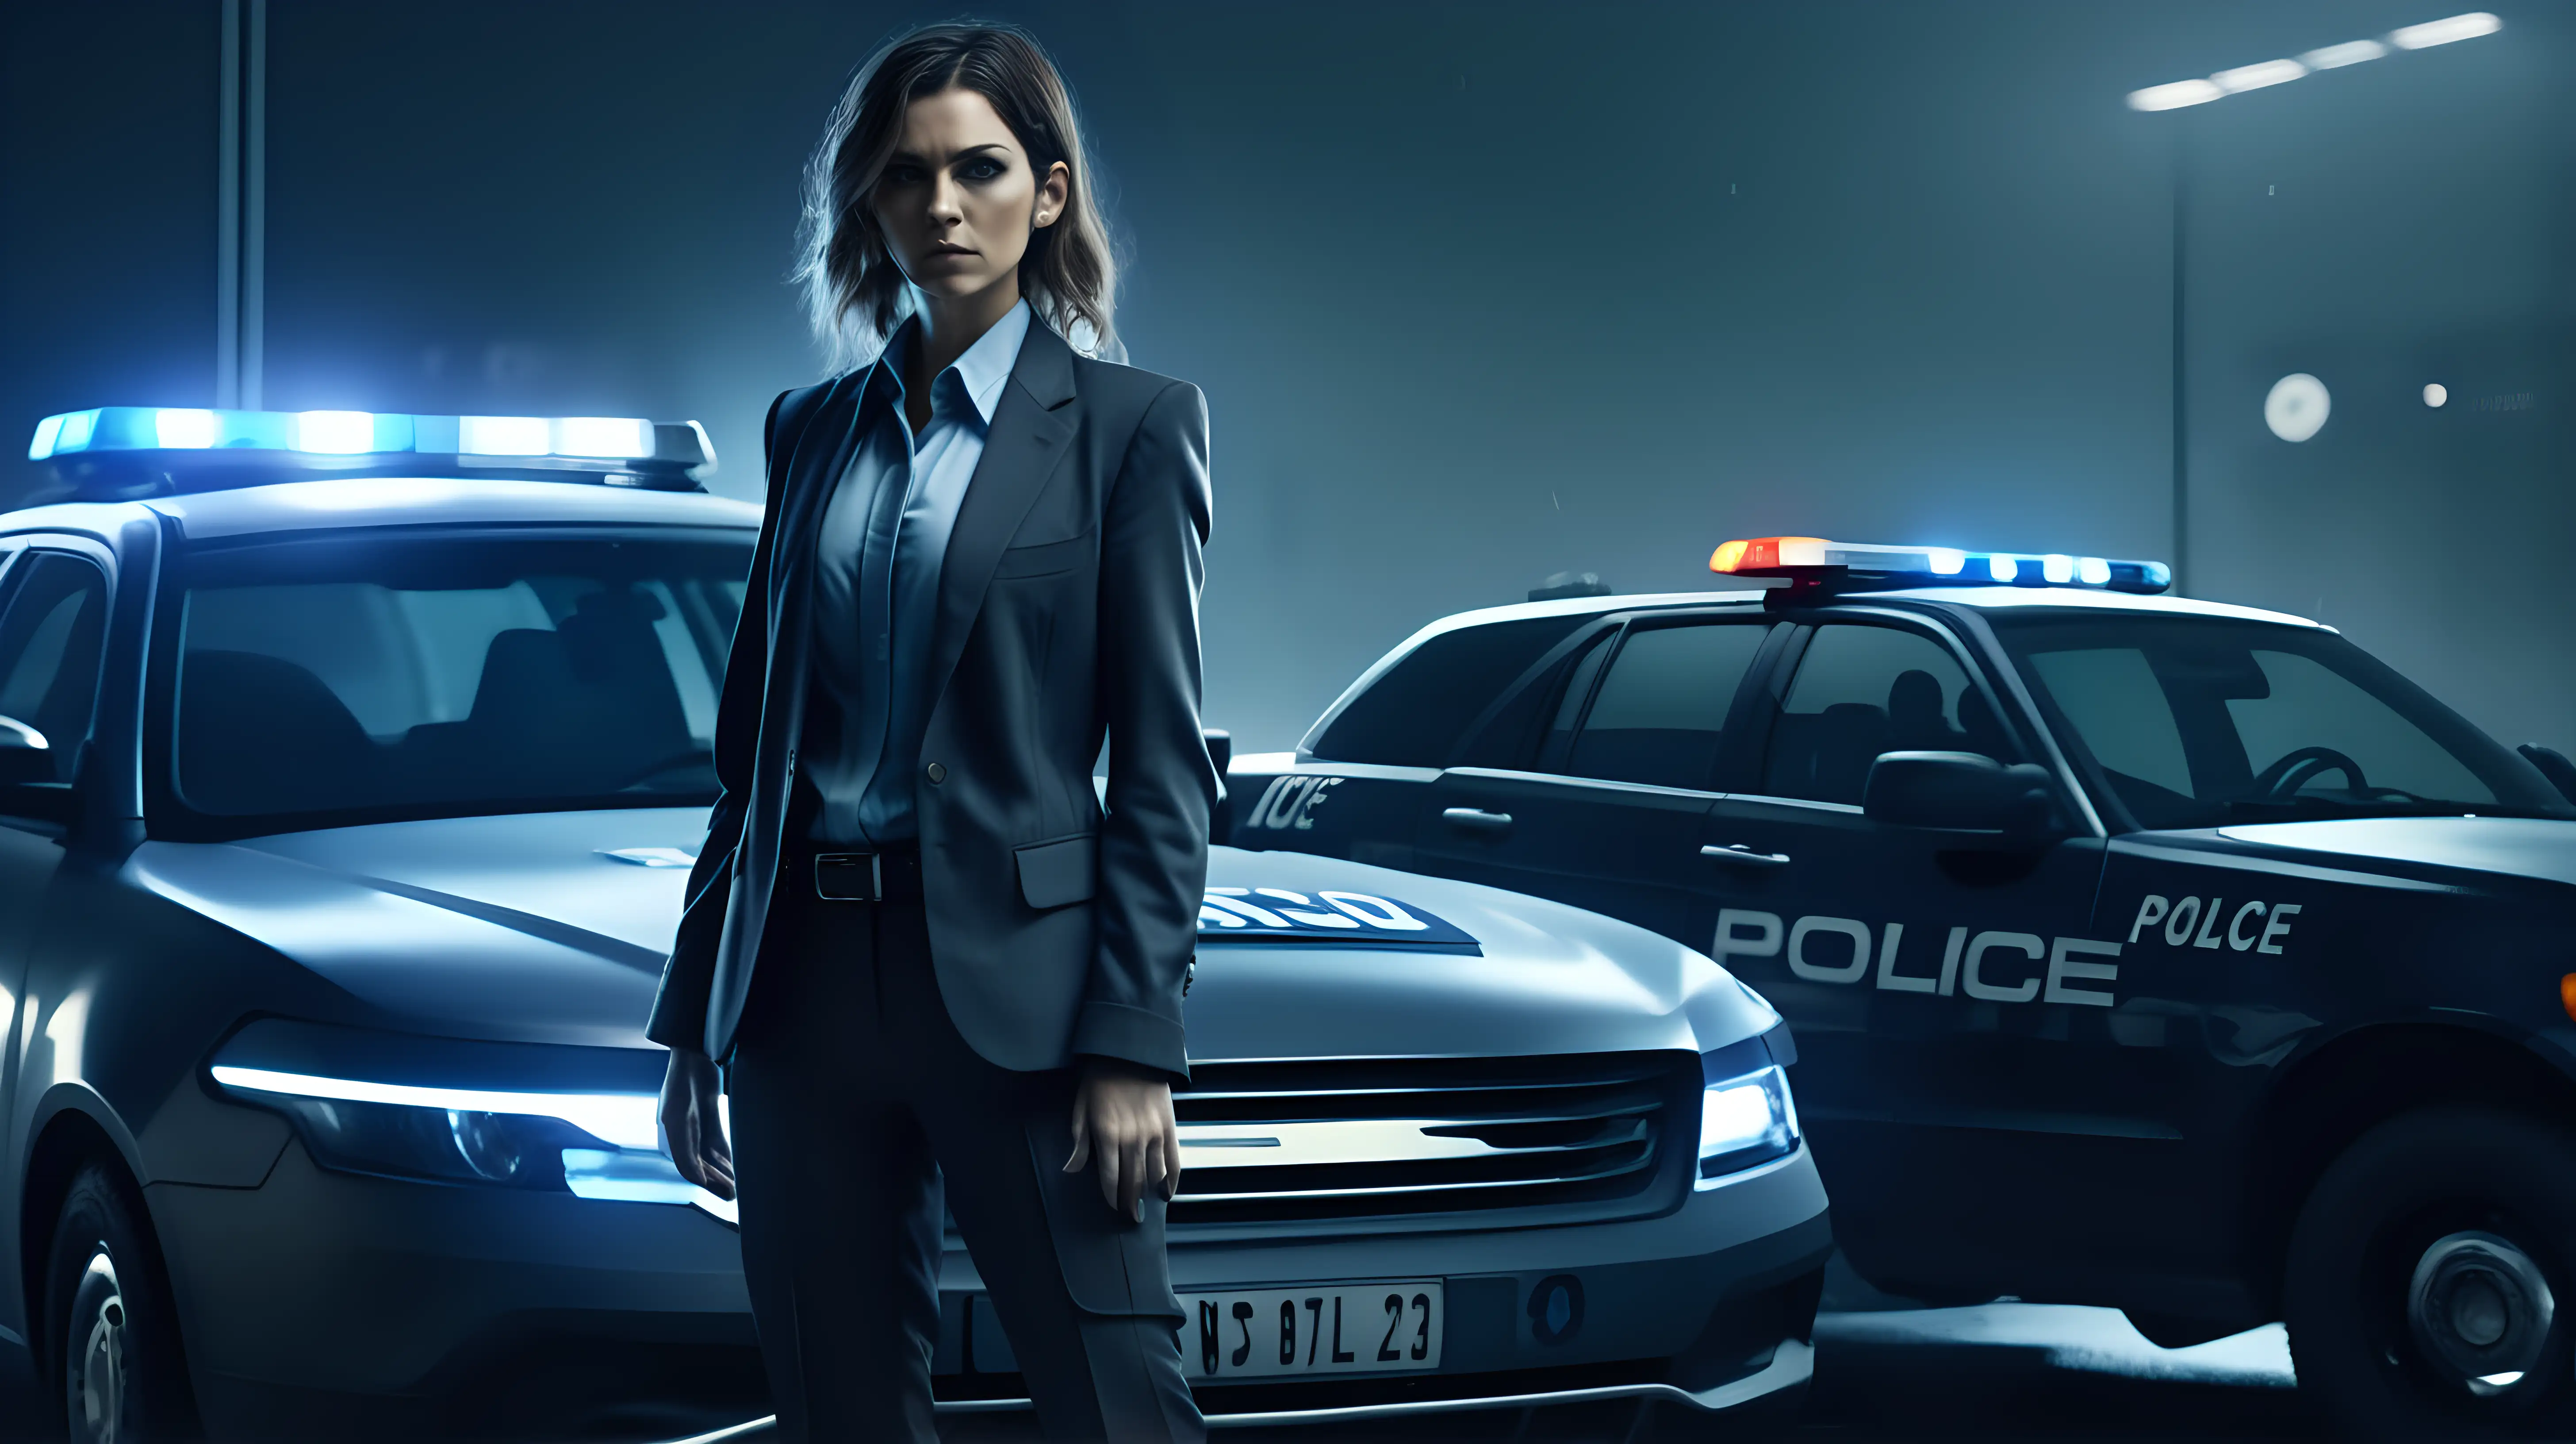 Futuristic Female Detective Stands Before Police Car in Dystopian Darkness